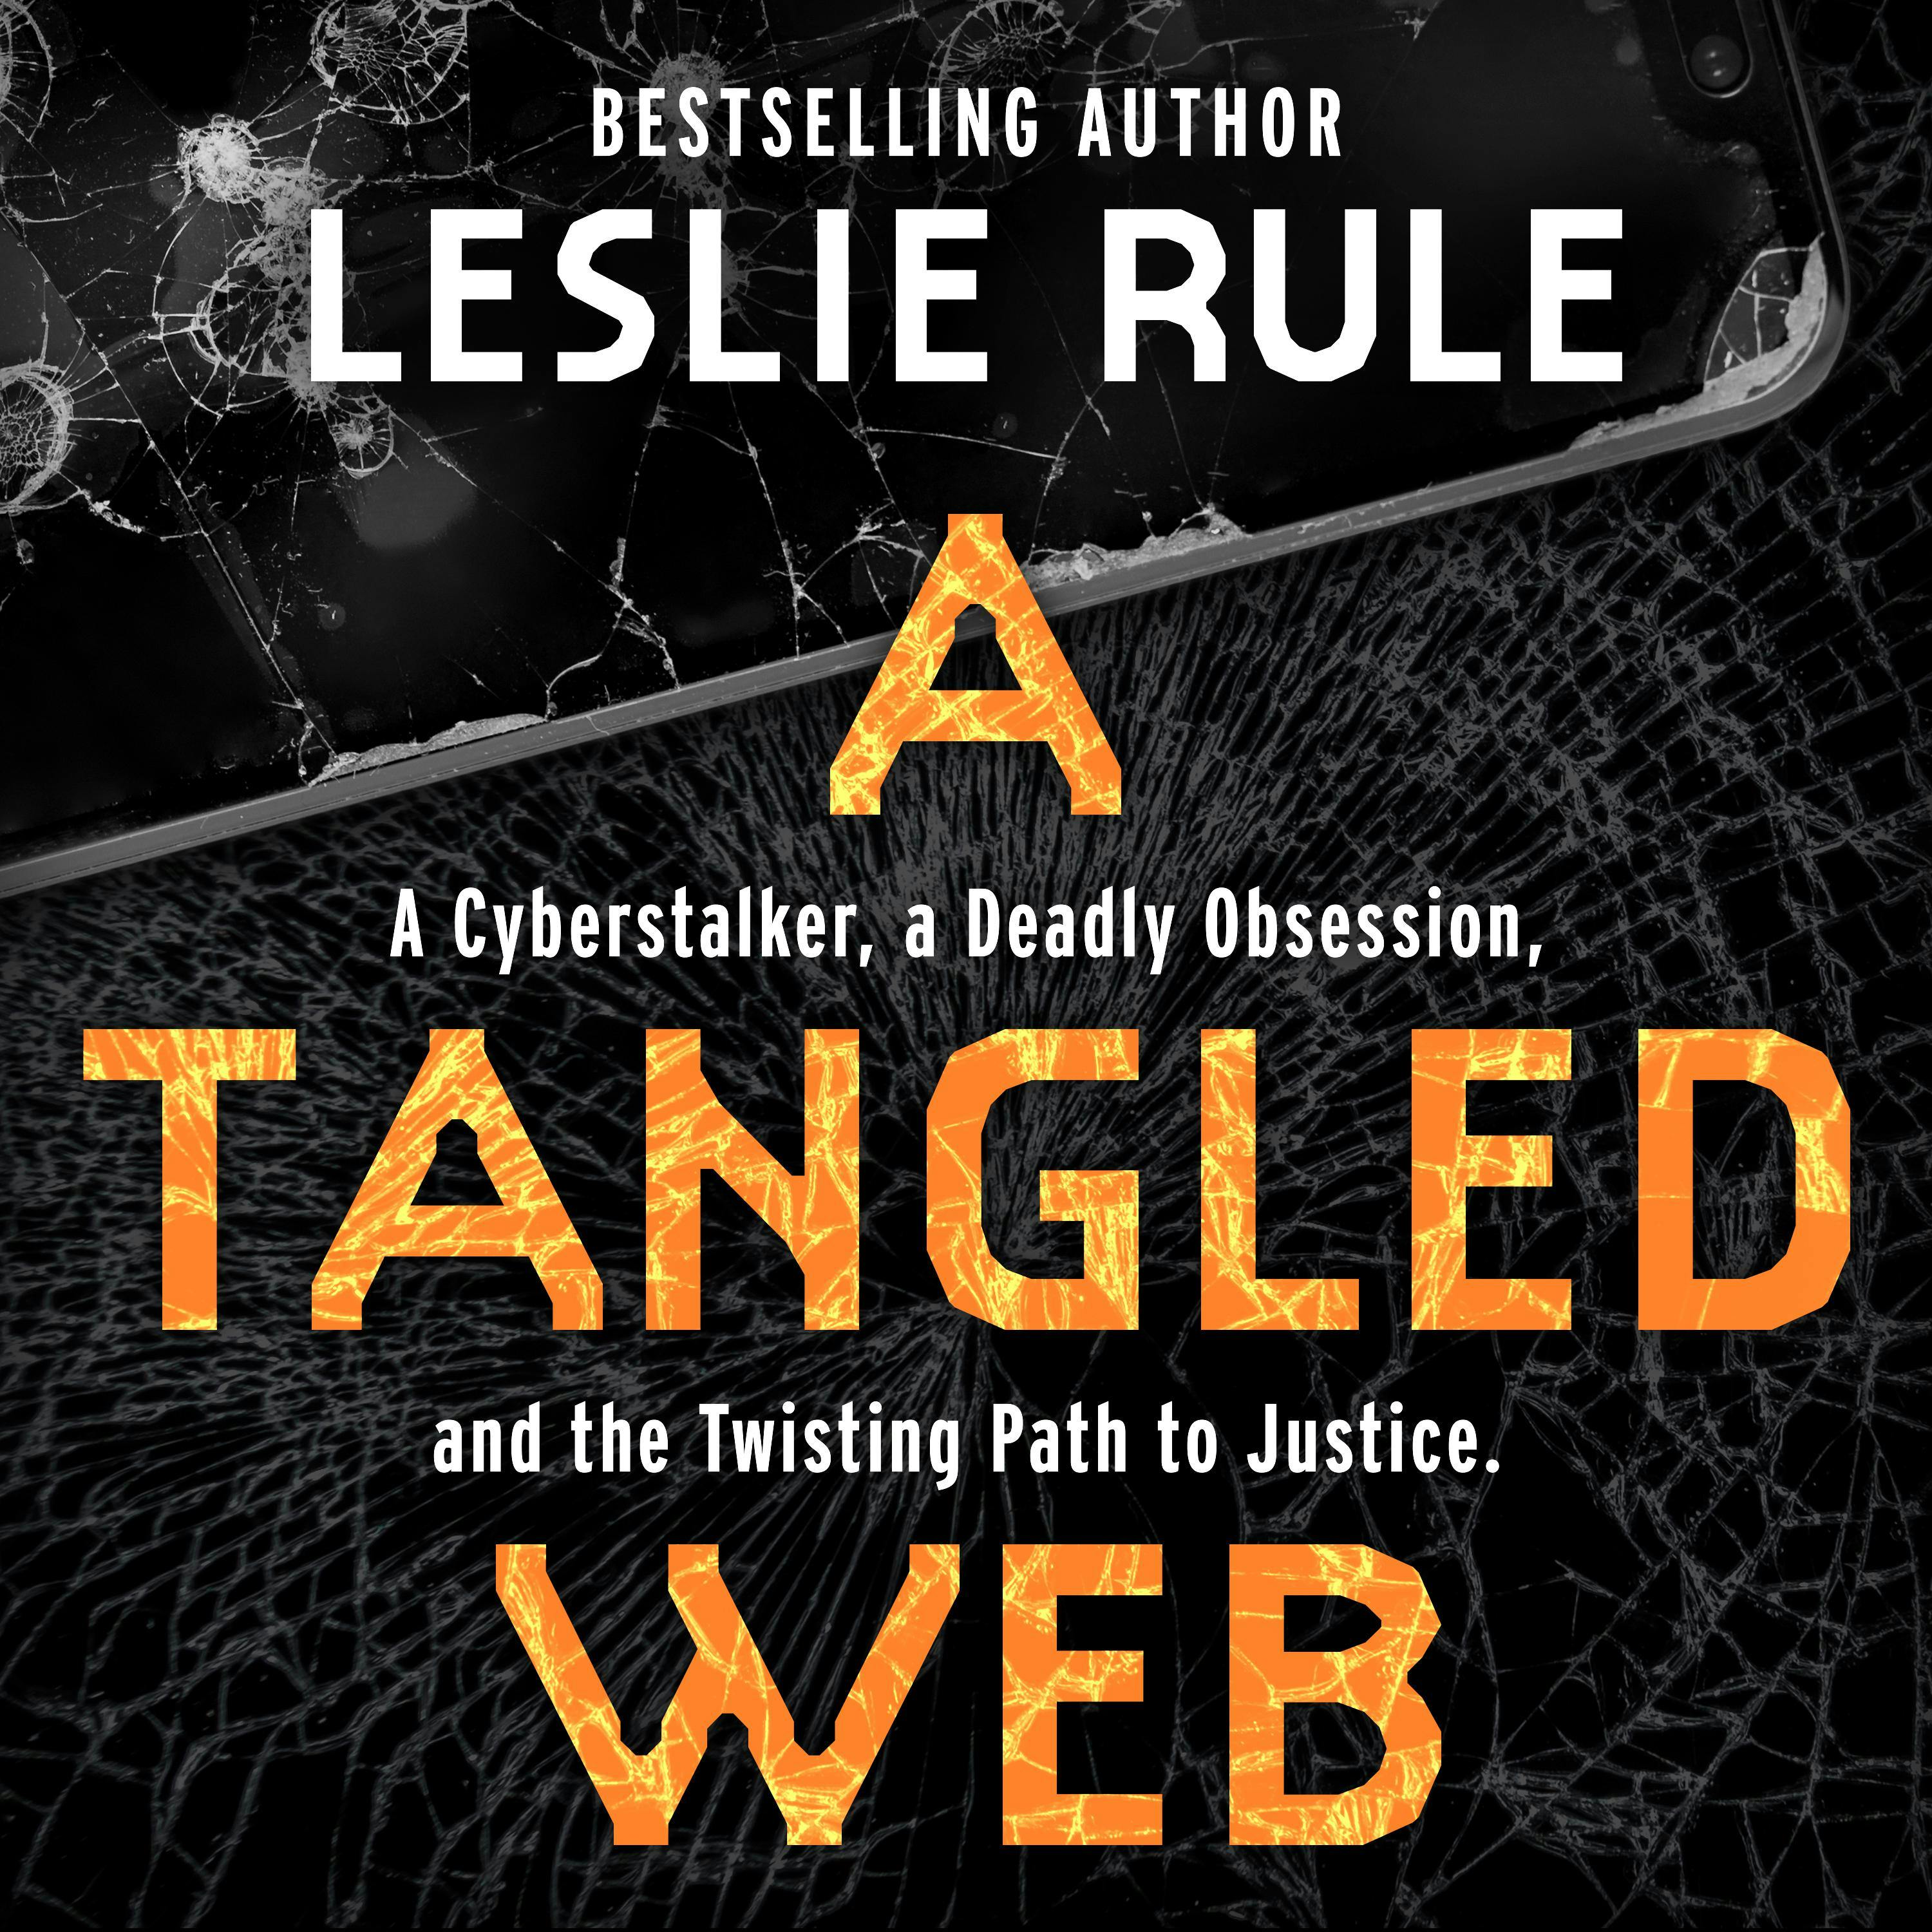 A Tangled Web: A Cyberstalker, a Deadly Obsession, and the Twisting Path to Justice - Leslie Rule